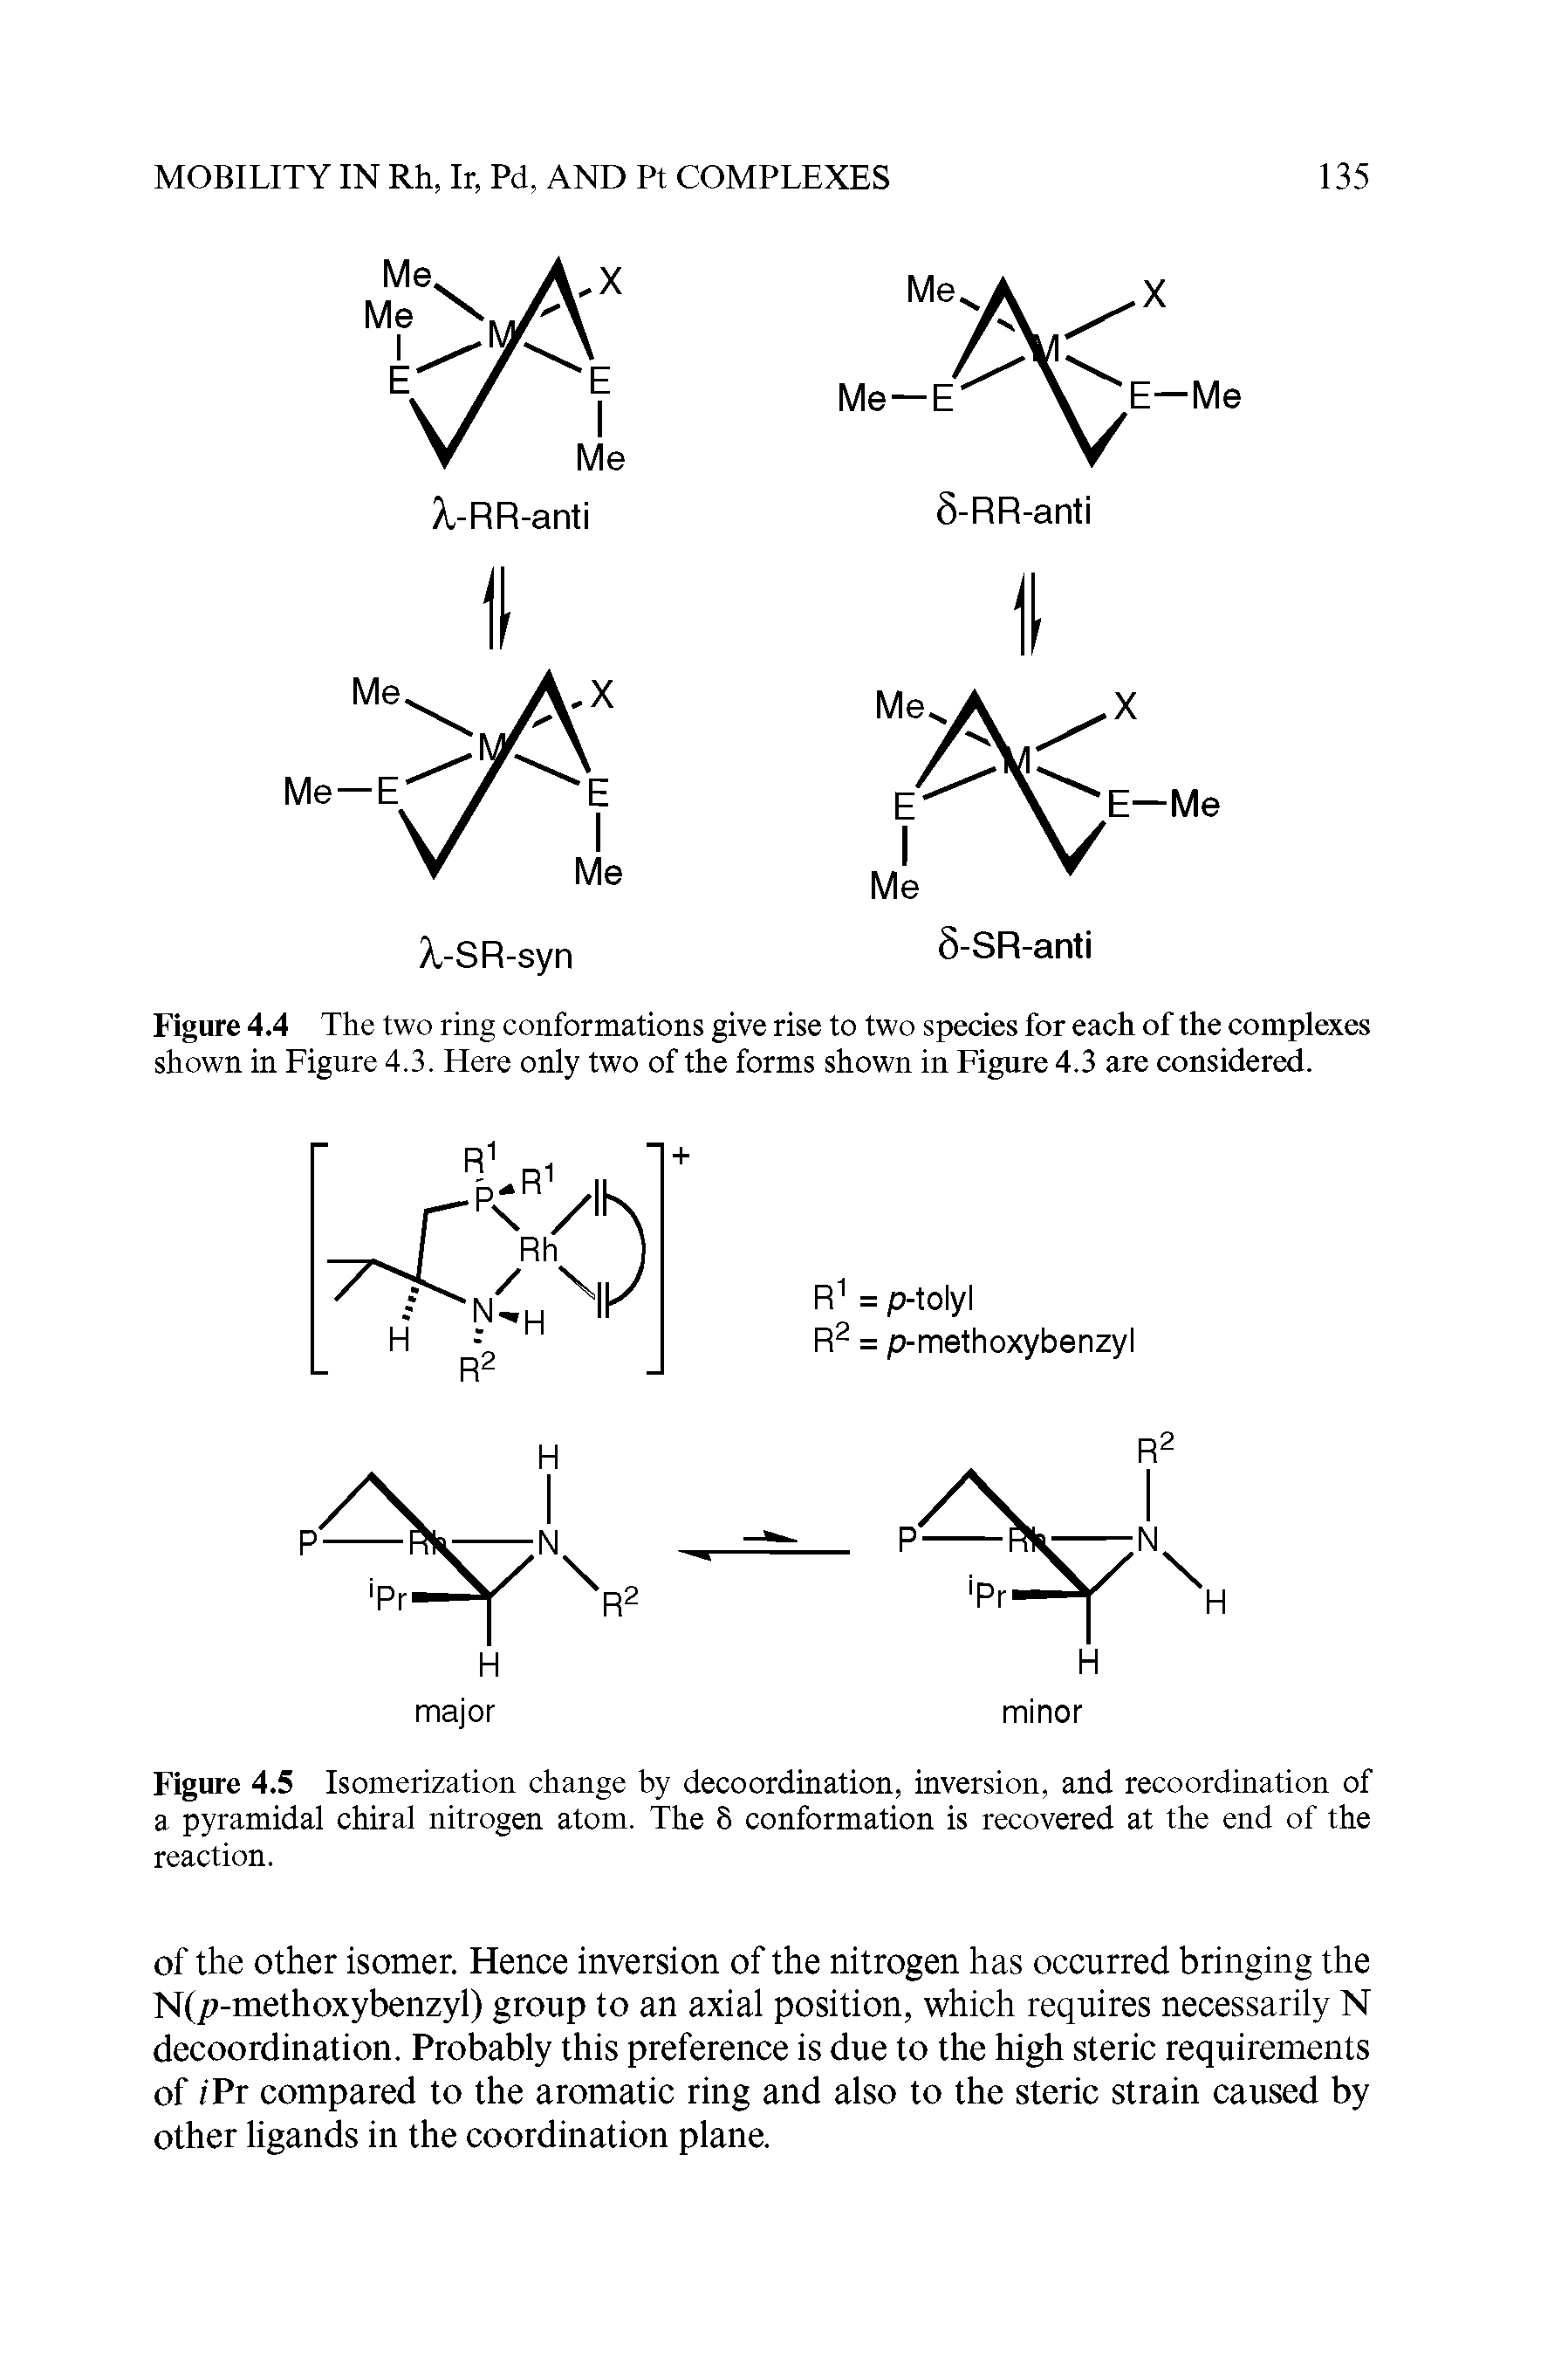 Figure 4.5 Isomerization change by decoordination, inversion, and recoordination of a pyramidal chiral nitrogen atom. The 8 conformation is recovered at the end of the reaction.